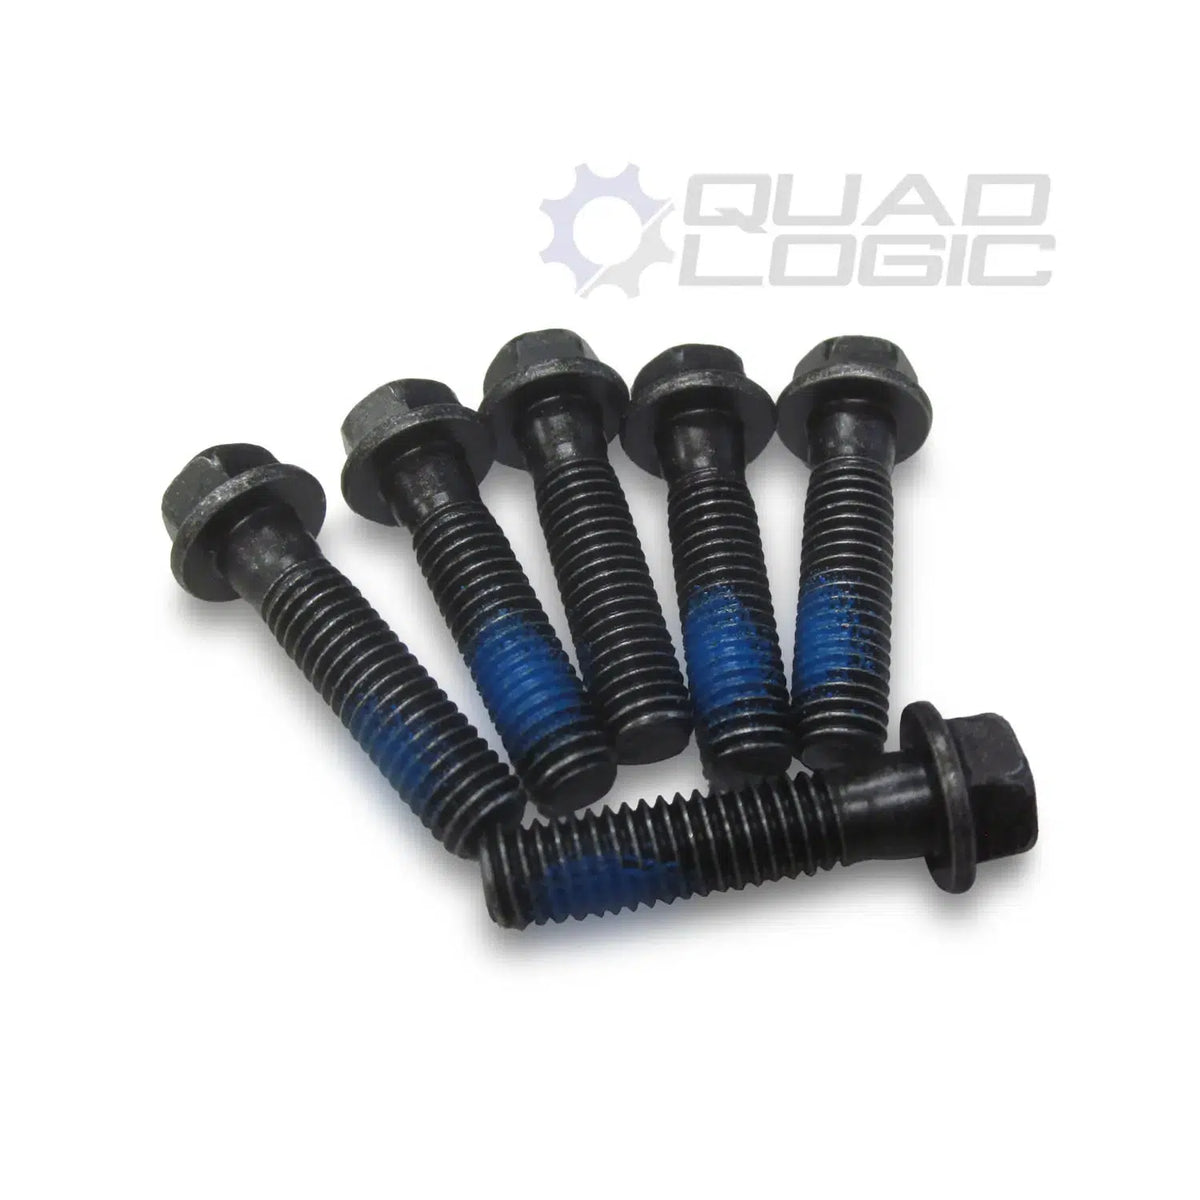 RZR XP 1000 Engine Bolts – Oil Pan, Stator Cover, Intake Boots, Water Pump Cover-Engine Bolts-Quad-Logic-6 Pack-Black Market UTV